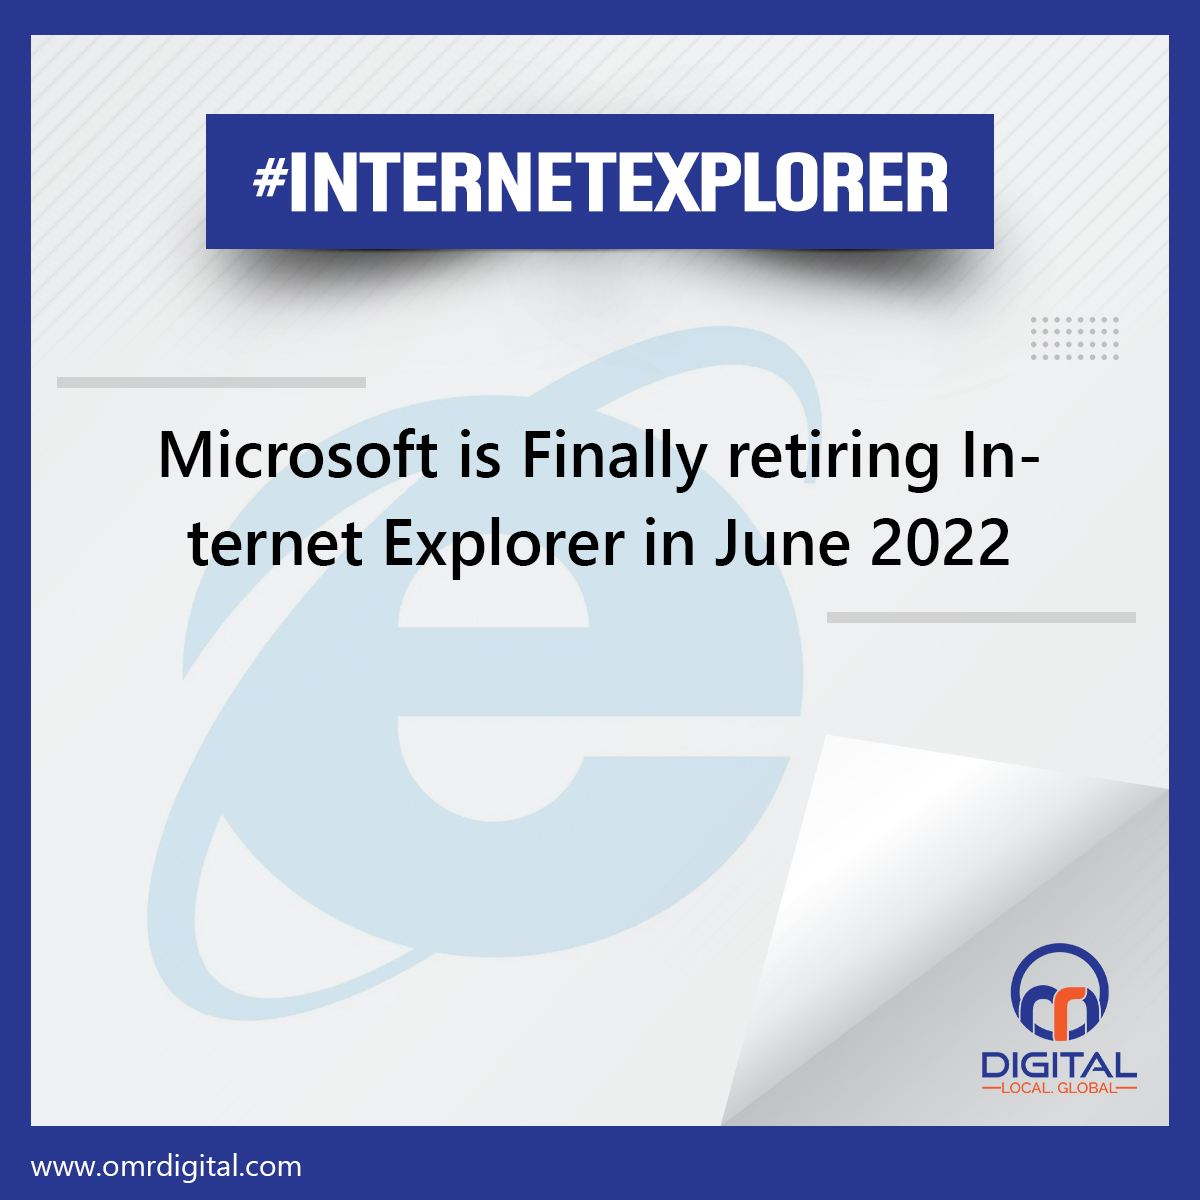 Microsoft Has Announced the End of Its Long-Running Internet Explorer Browser